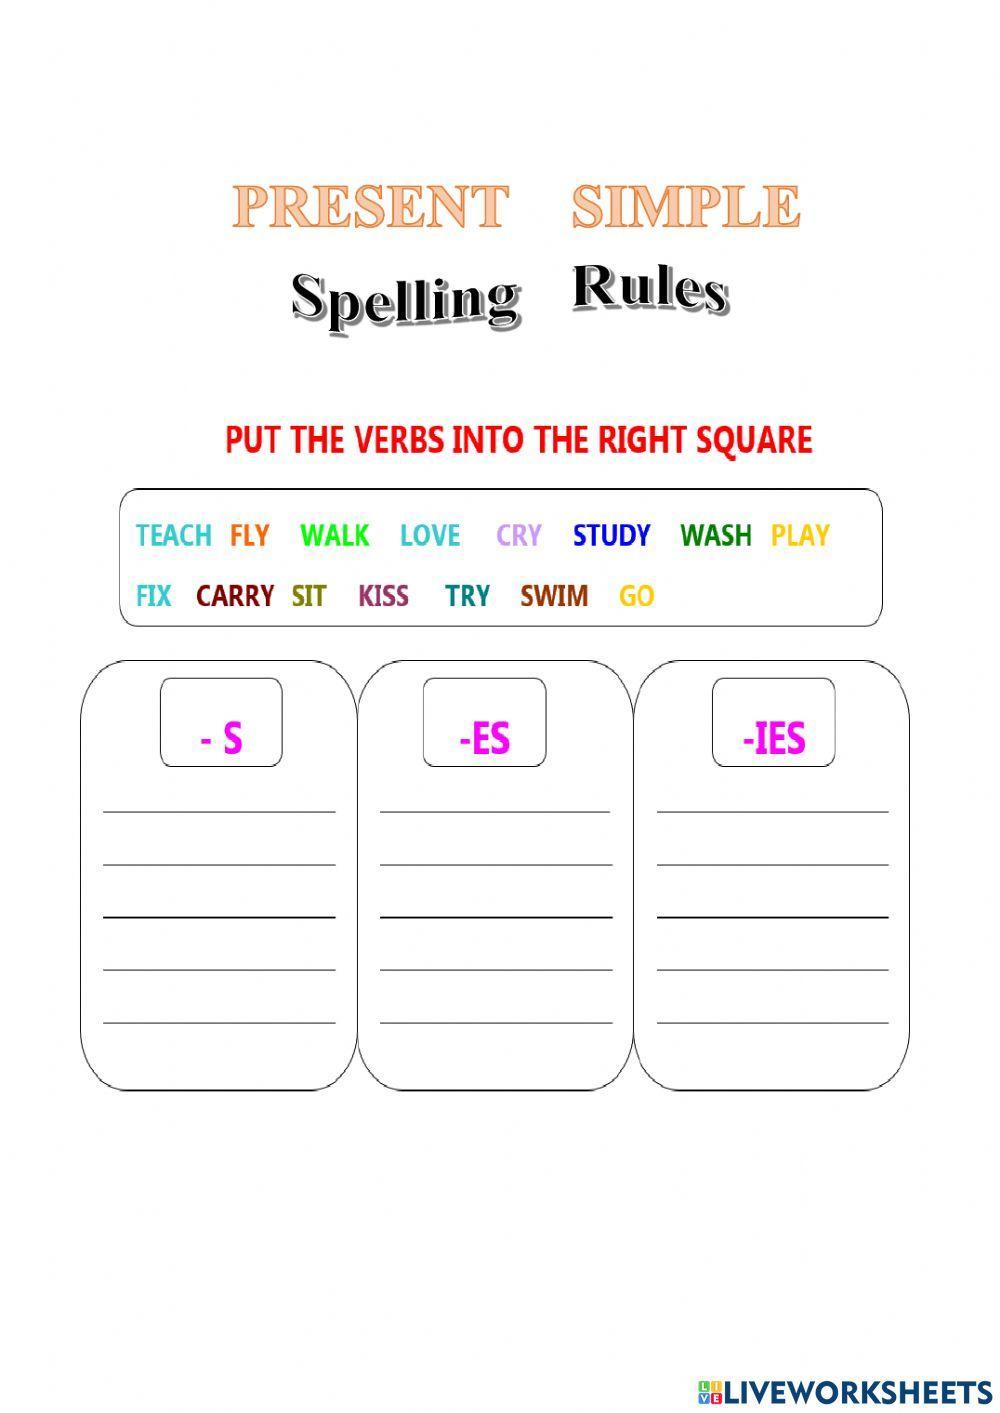 Spelling rules-exercises